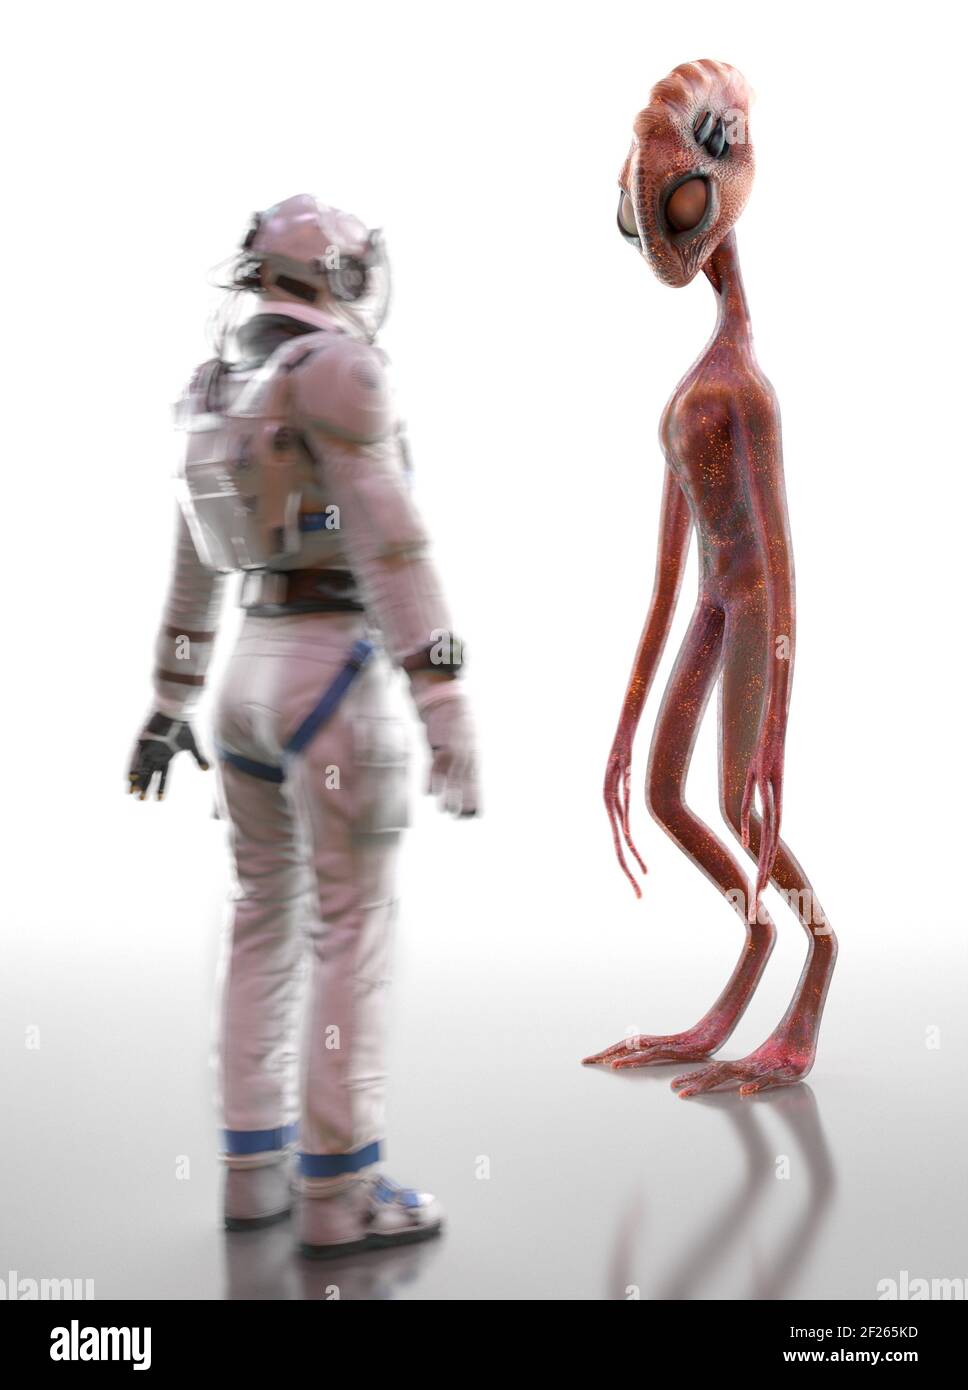 Meeting and acquaintance of an alien and a  human. Humanoid alien and astronaut on a white background. Extraterrestrial contact. 3D rendering Stock Photo